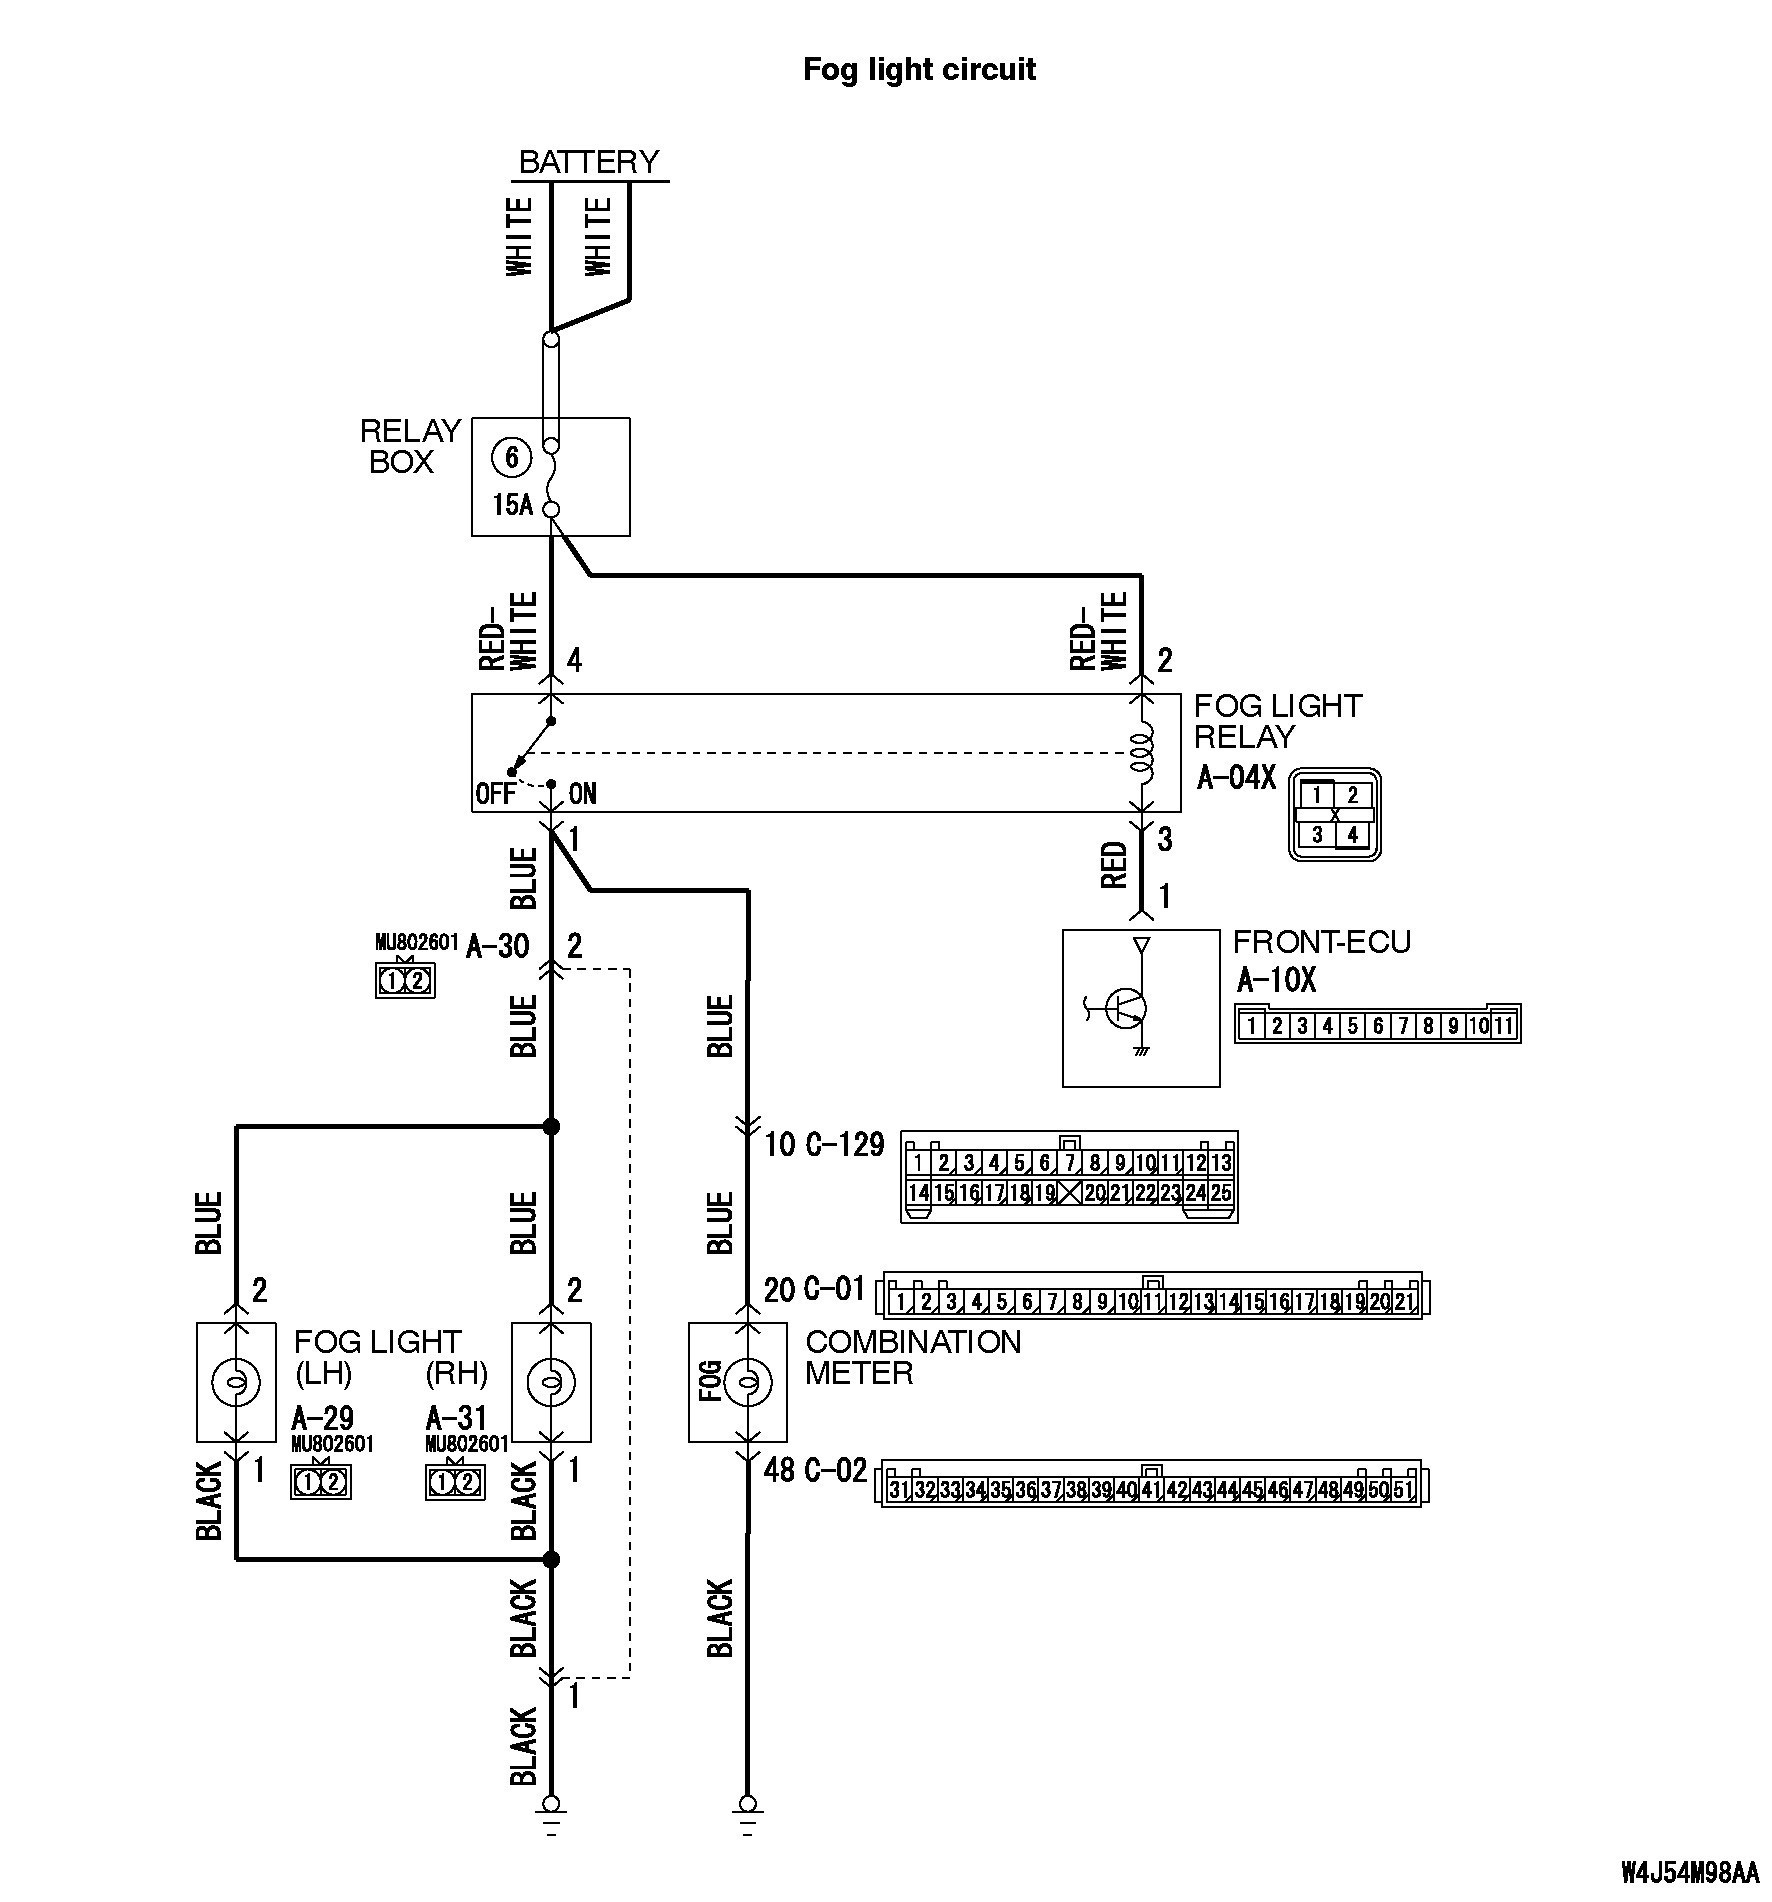 Fog Light Wiring Diagram with Relay New Wiring Diagram for A Relay for Fog Lights Inspirationa